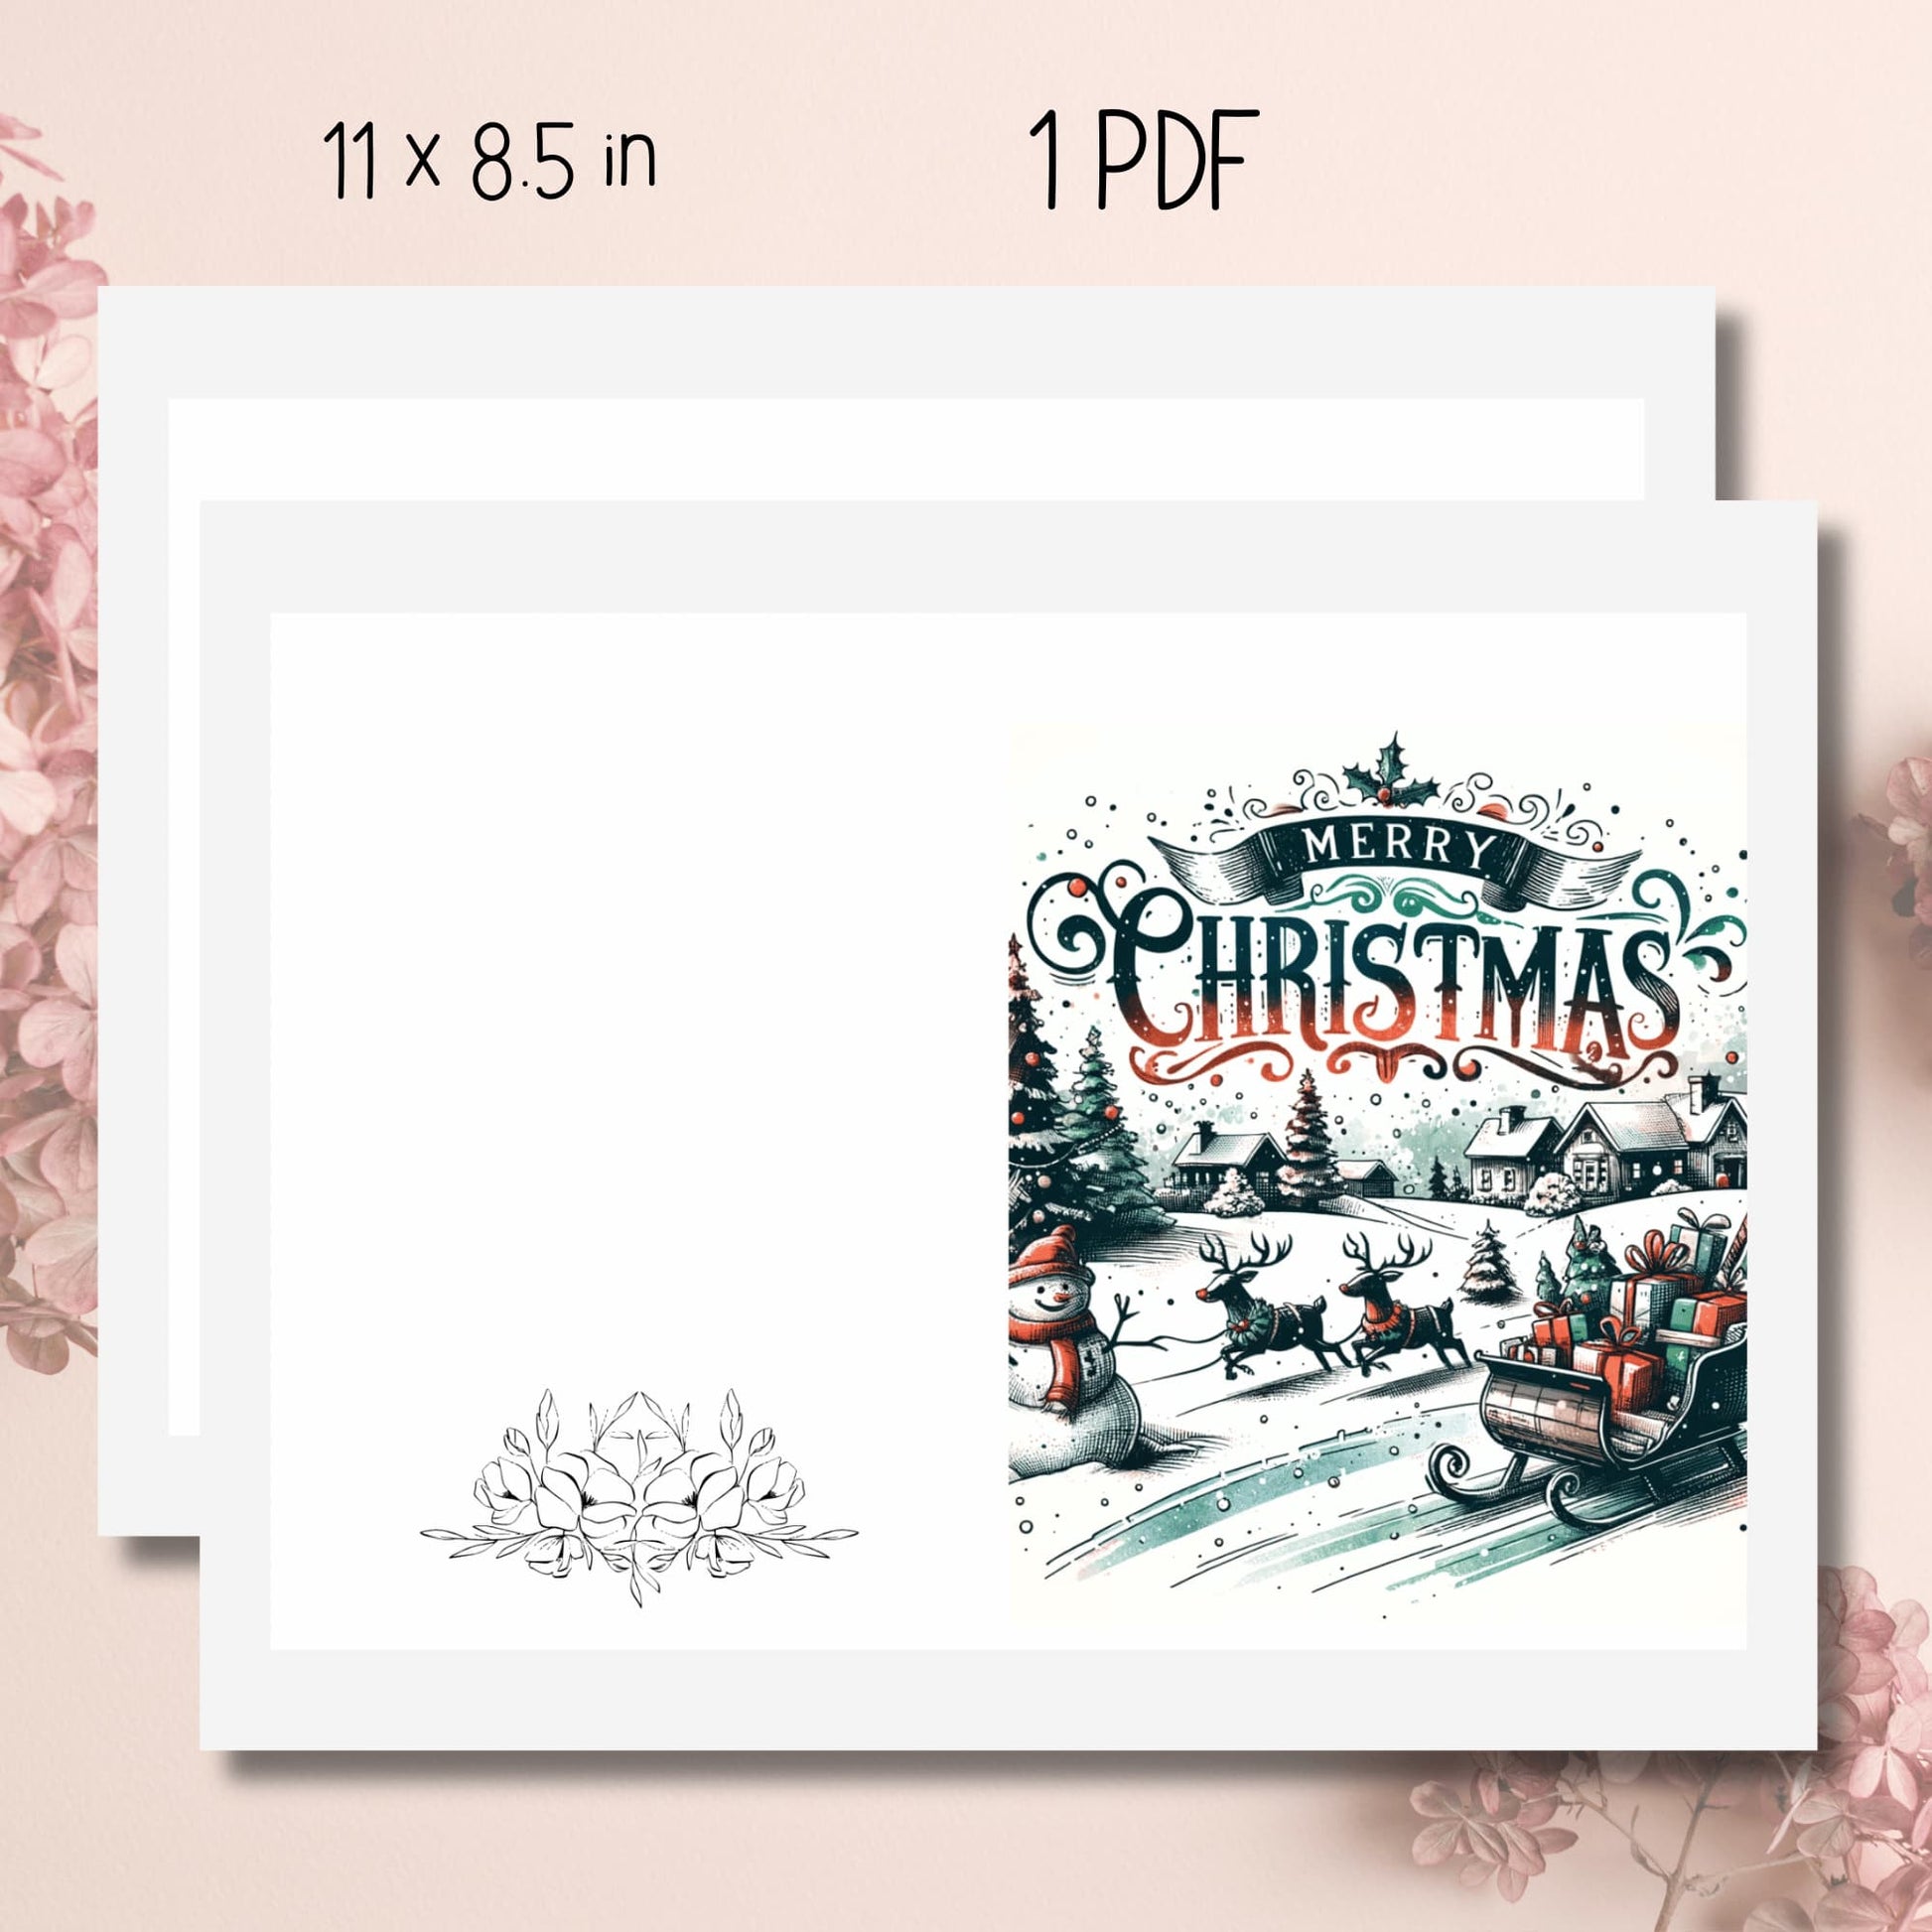 11x8.5 inch greeting card print-ready sheet, featuring a crisp and professional layout, ready for printing and personalization.